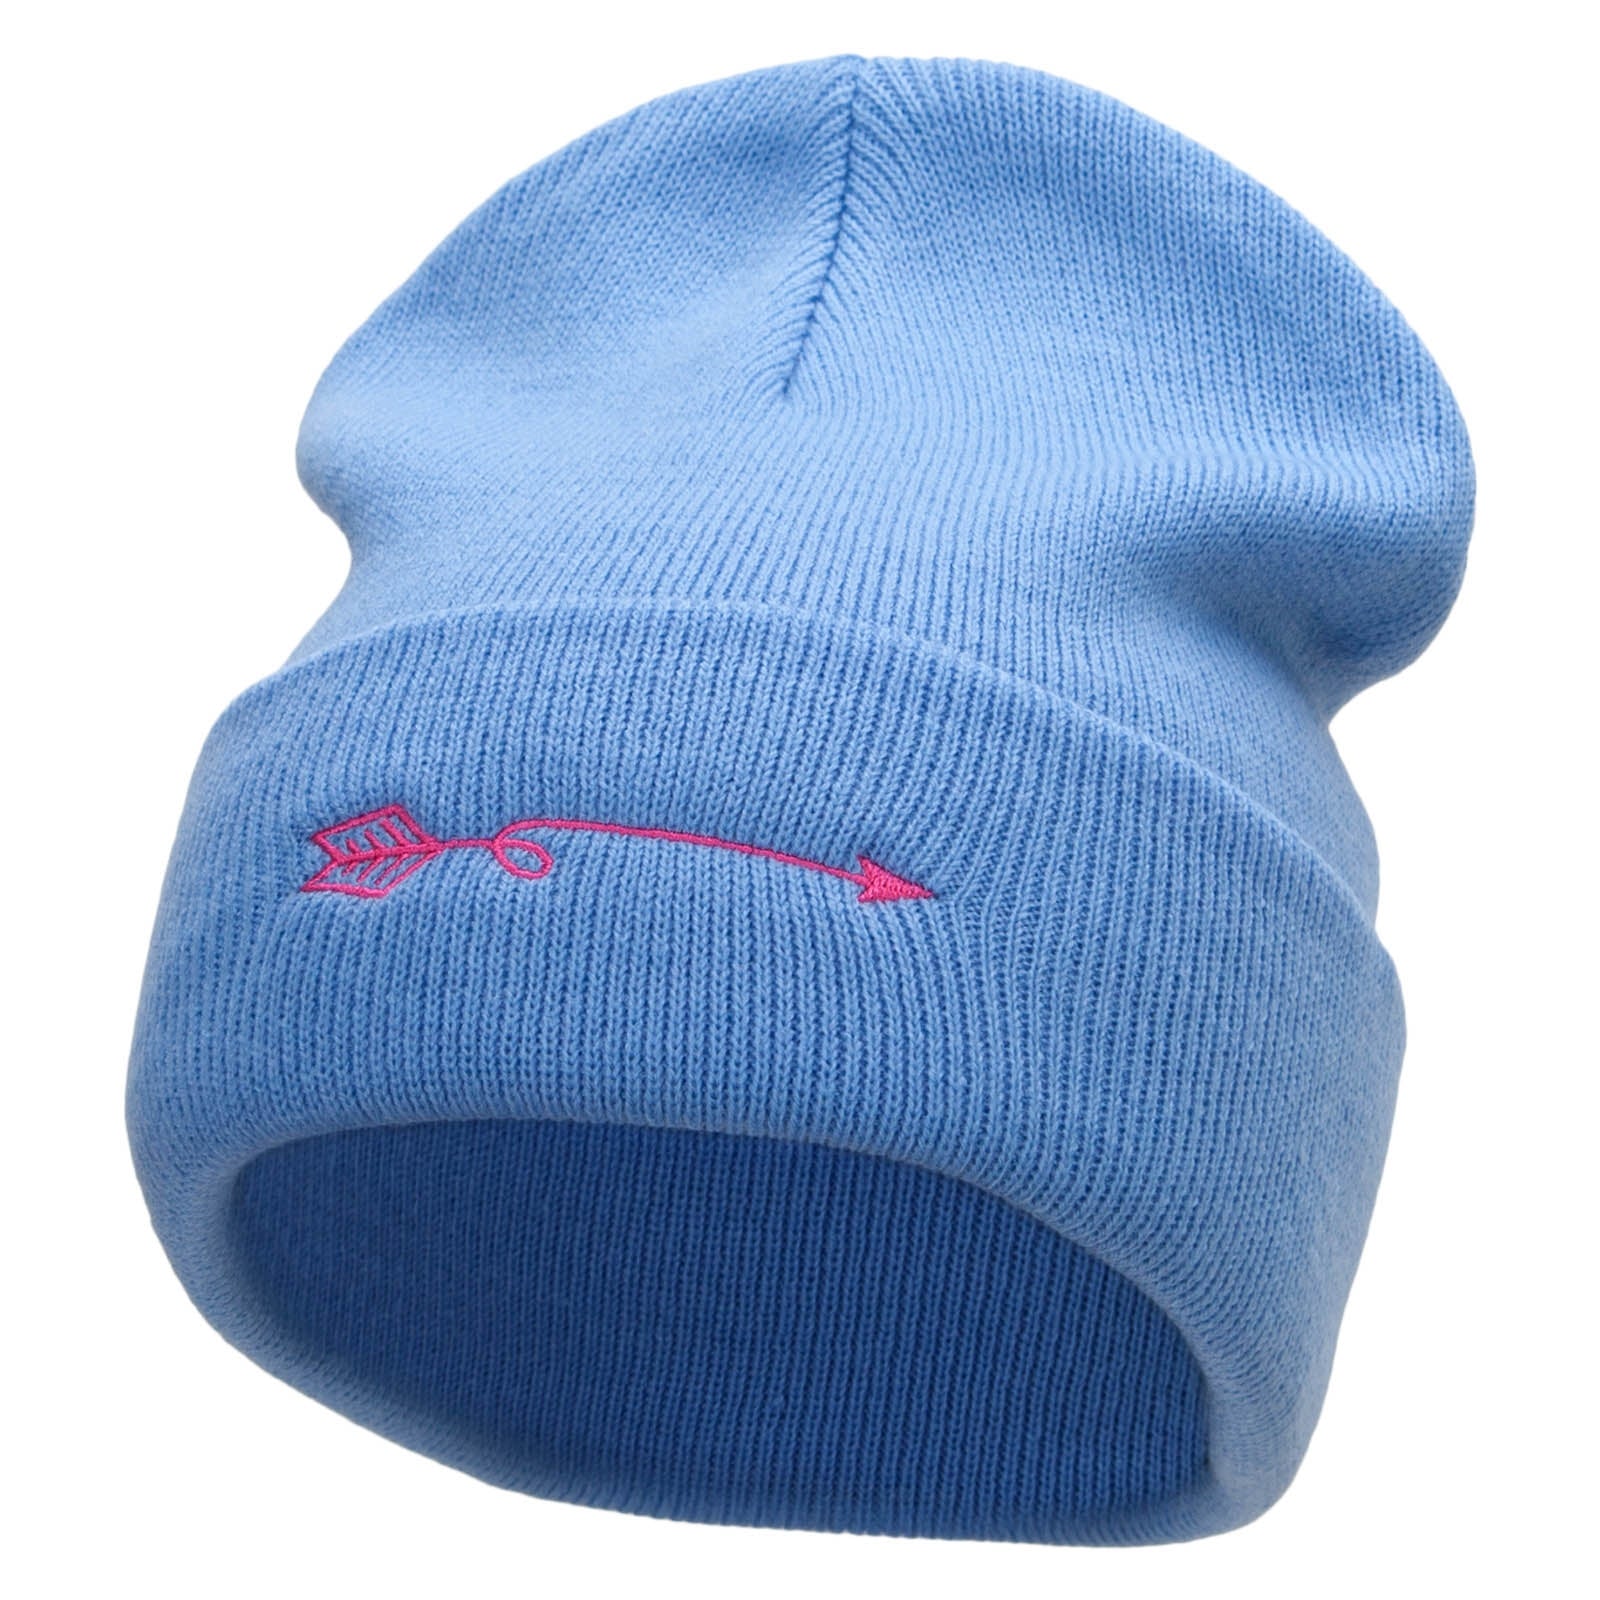 Swirly Arrow Embroidered 12 Inch Long Knitted Beanie - Sky Blue OSFM